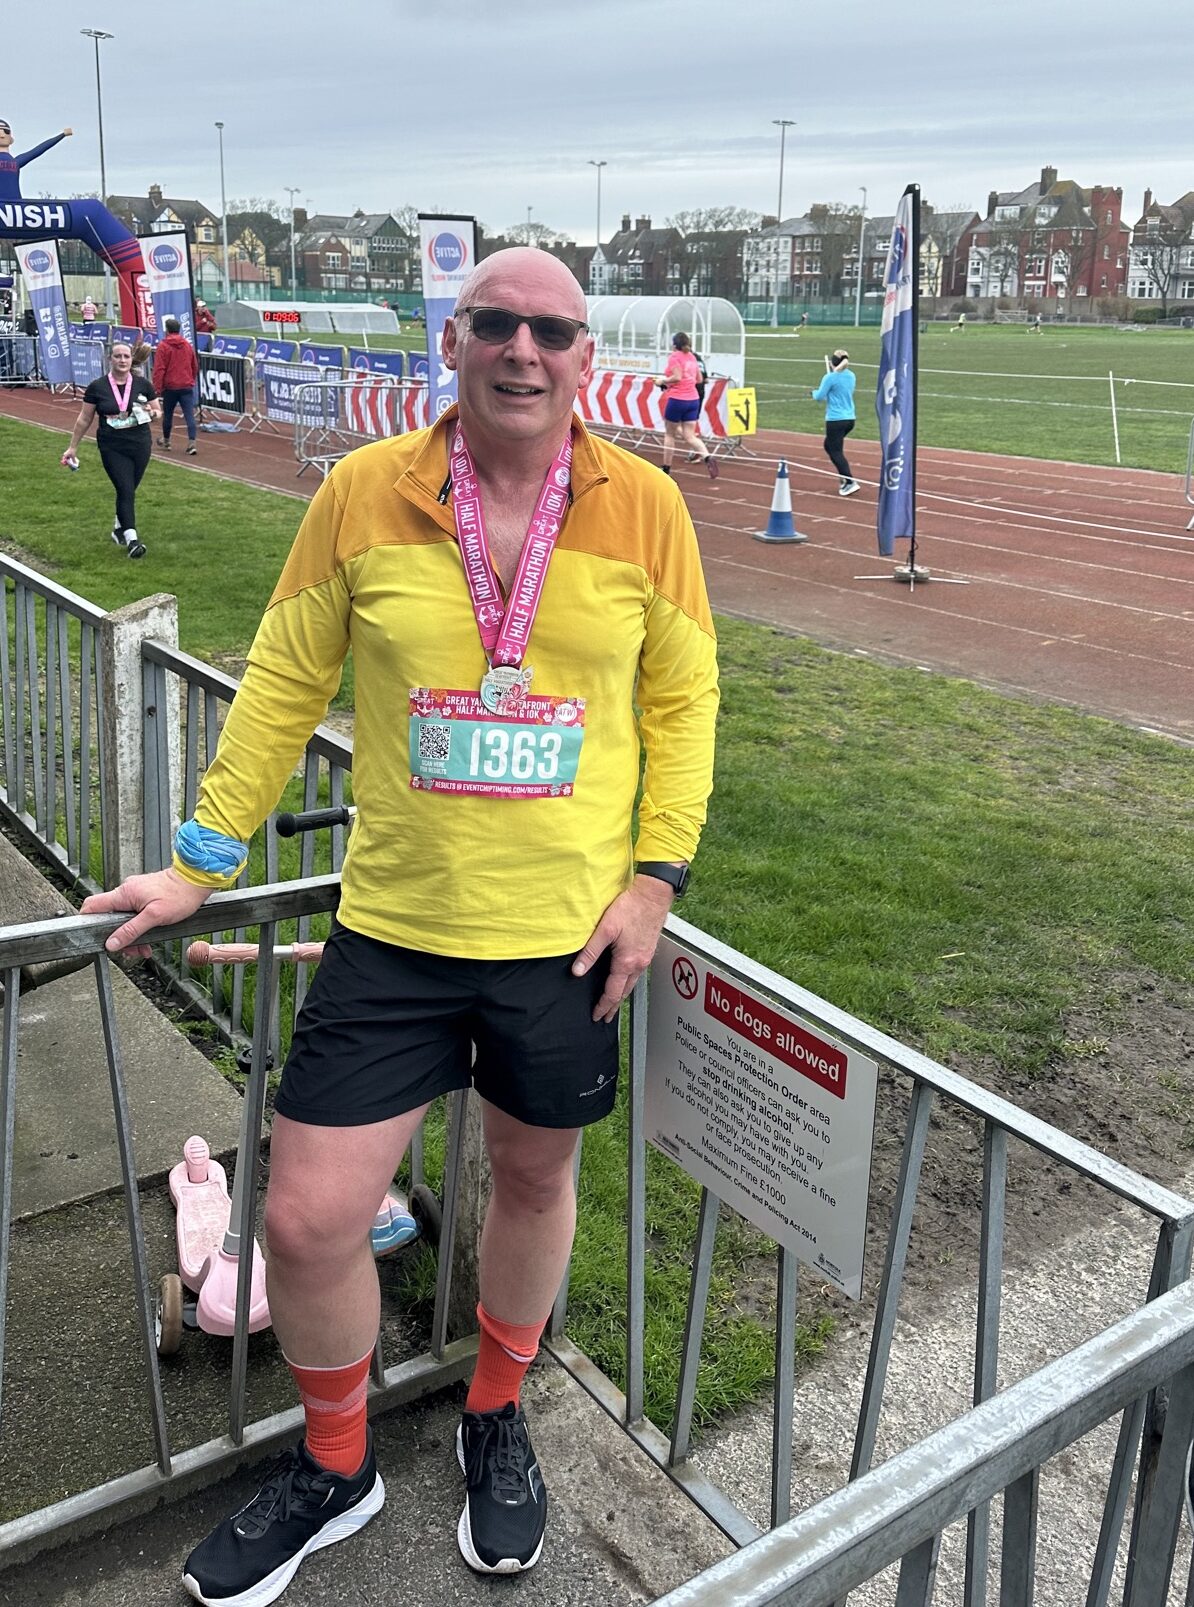 Glen proudly standing in front of a running track wearing a medal. He is wearing sunglasses and a bright yellow jacket.